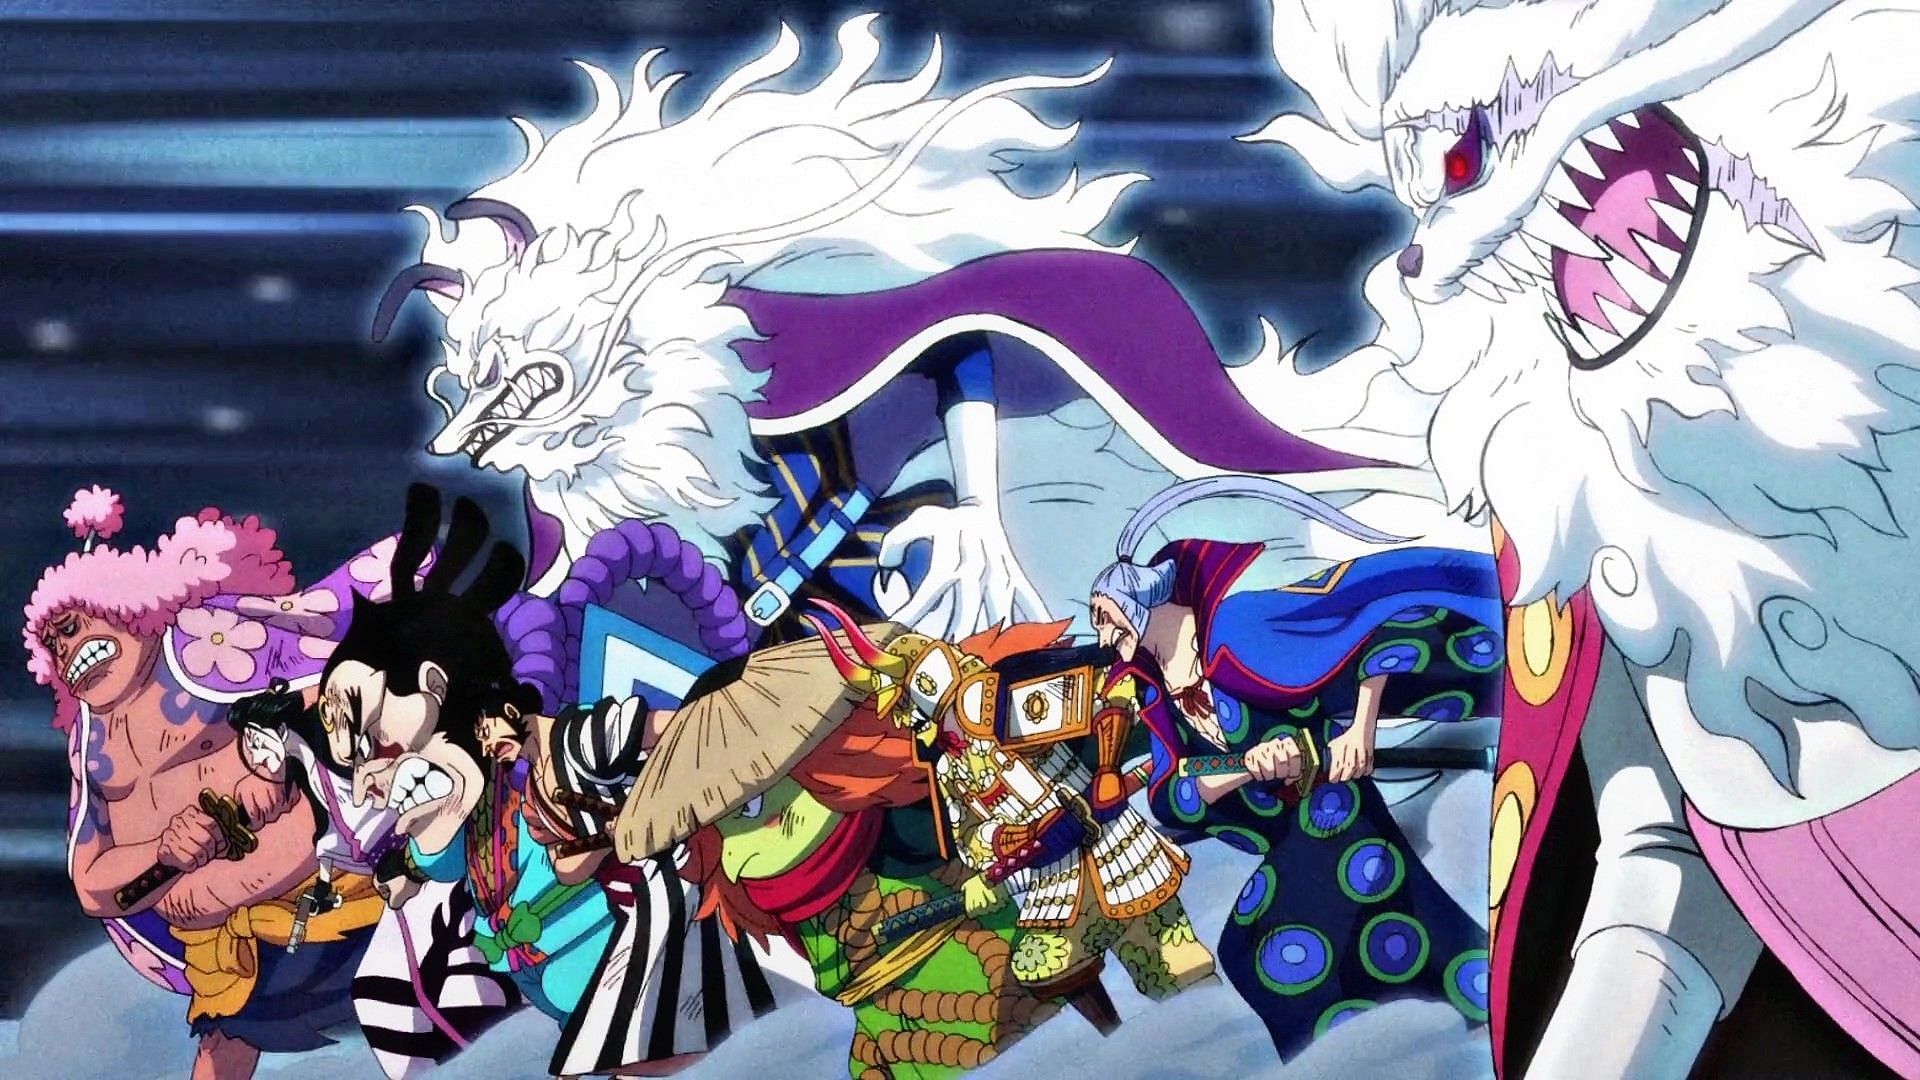 Izo and Ashura Doji were the only casualties among the Red Scabbards, despite others suffering worst injuries (Image via Eiichiro Oda/Shueisha, One Piece)